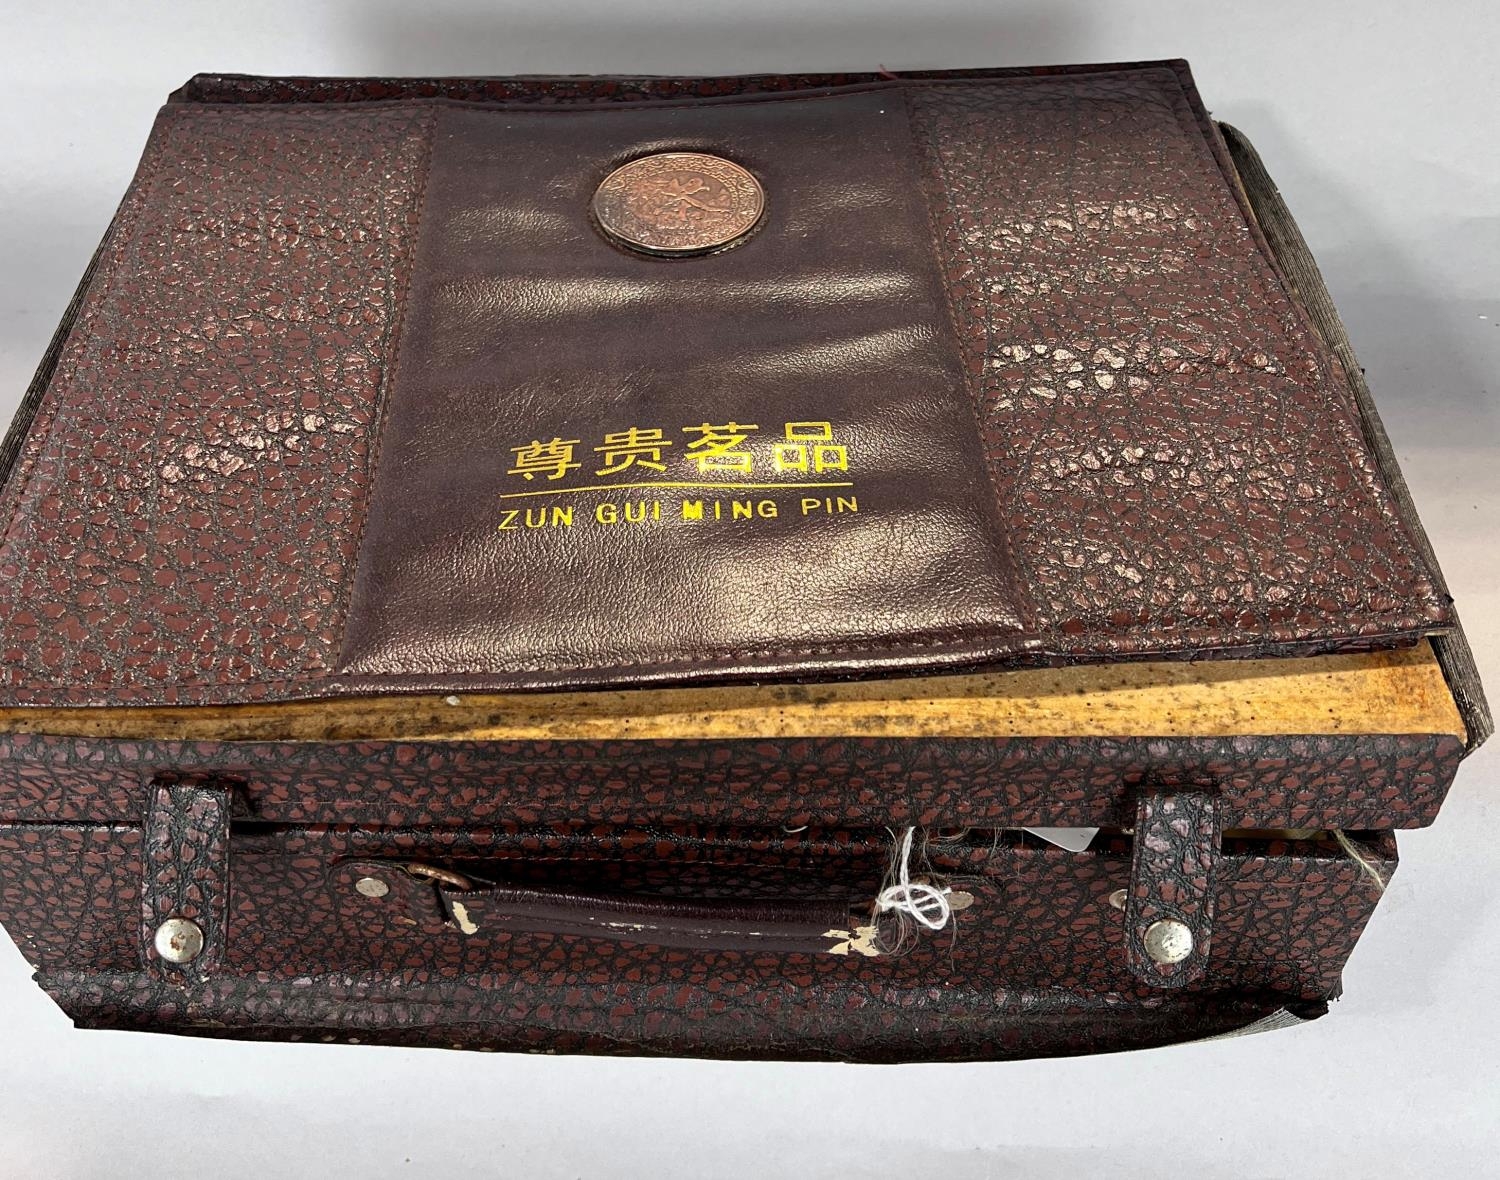 A Chinese clay tea service set in a briefcase, and a Chinese silk liners storage box. - Image 3 of 6